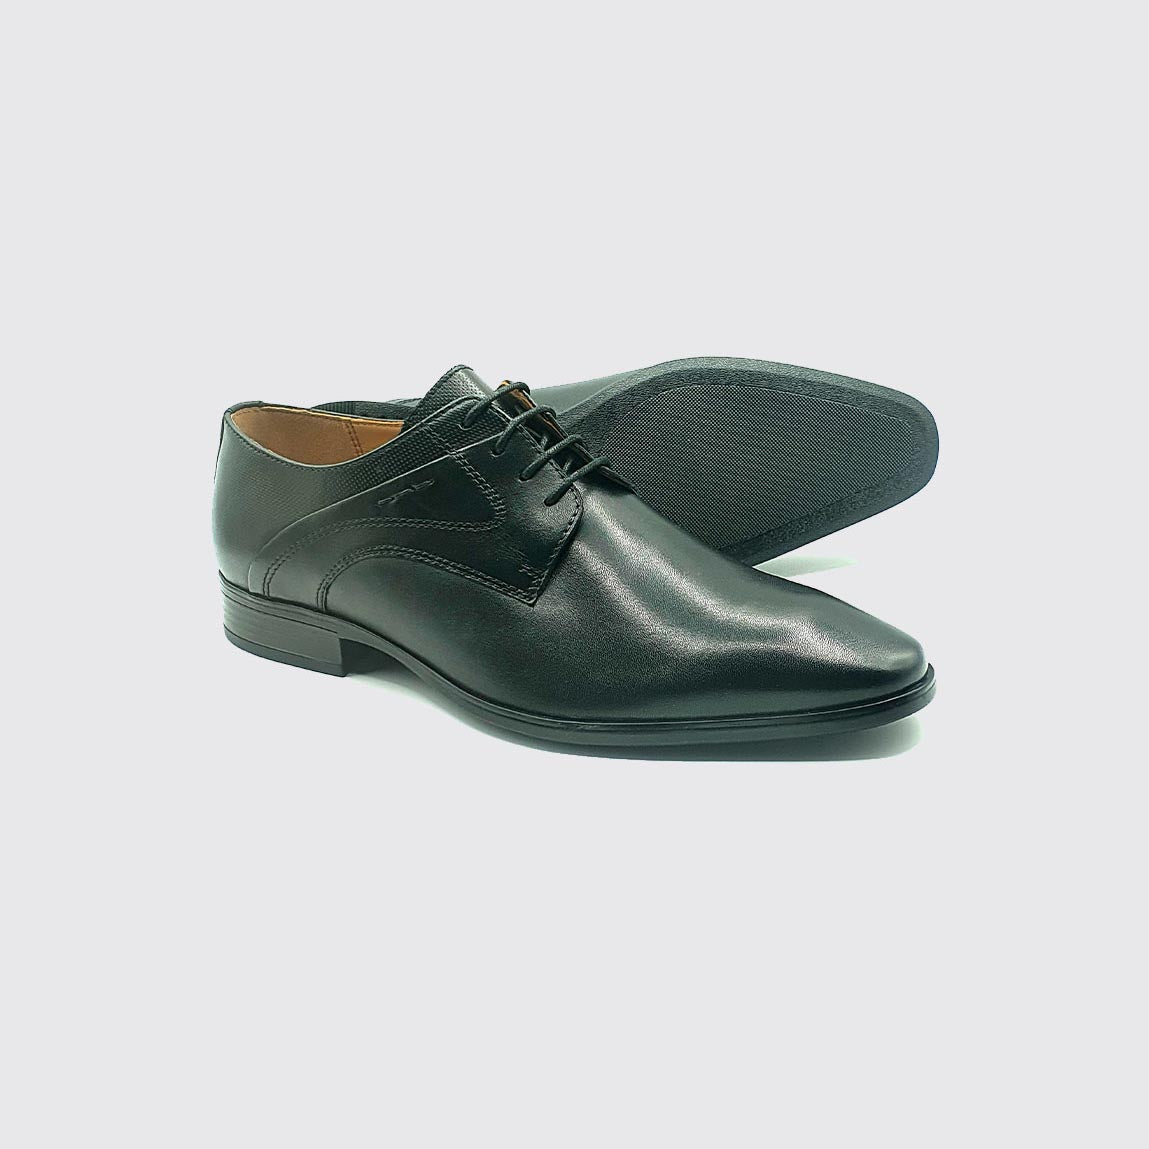 Frontal pair view of the Dubarry Dempsey Black Formal Dress Shoes.